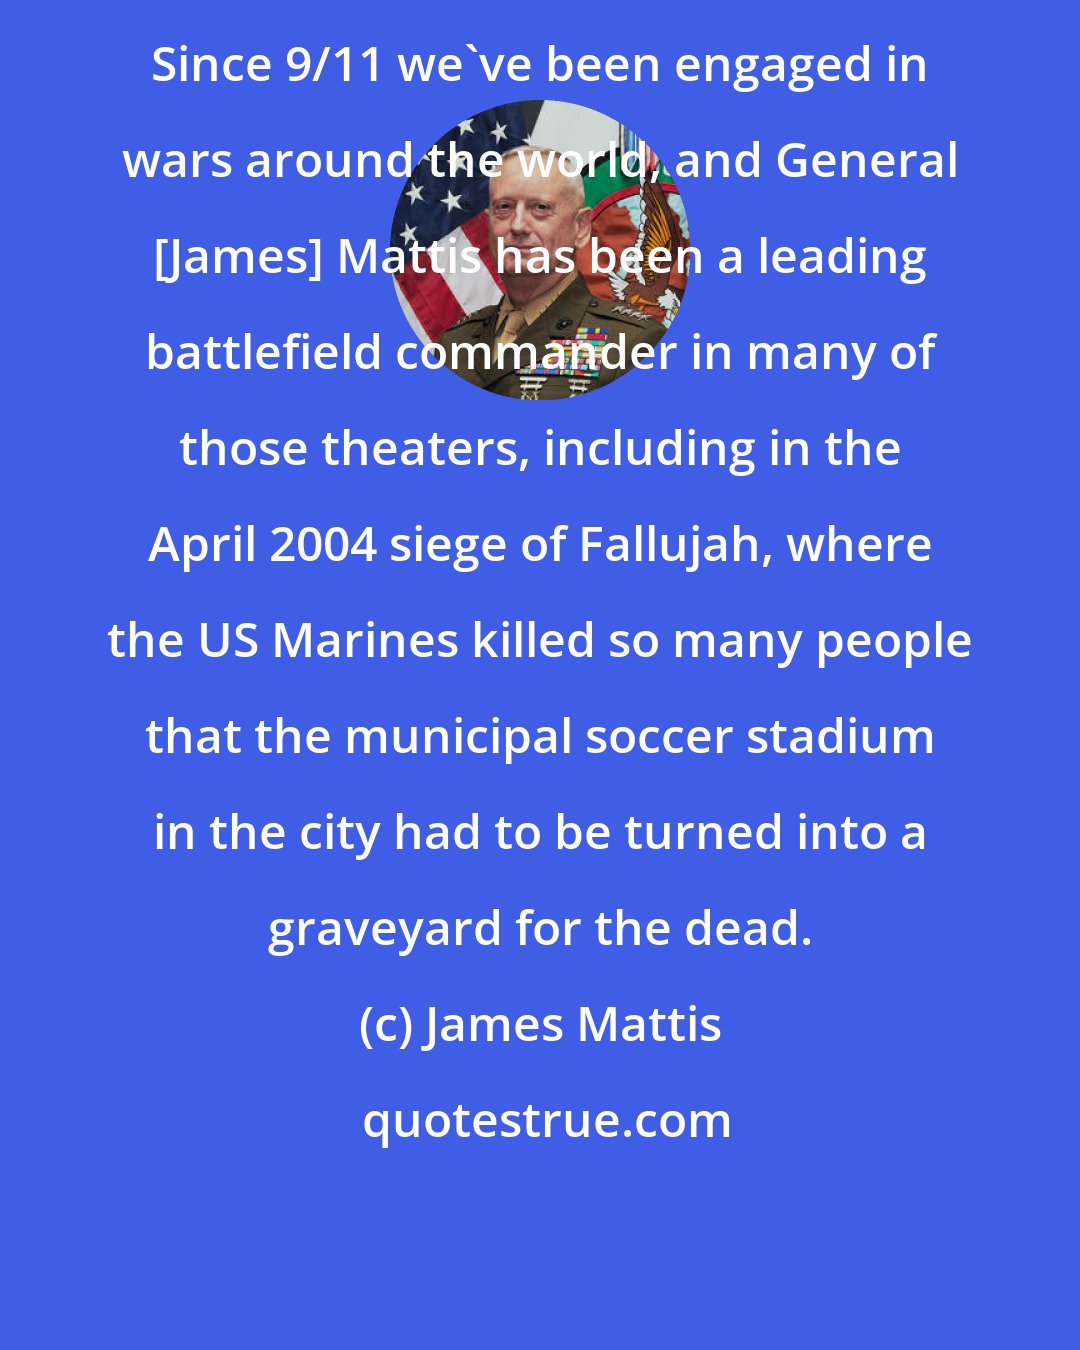 James Mattis: Since 9/11 we've been engaged in wars around the world, and General [James] Mattis has been a leading battlefield commander in many of those theaters, including in the April 2004 siege of Fallujah, where the US Marines killed so many people that the municipal soccer stadium in the city had to be turned into a graveyard for the dead.